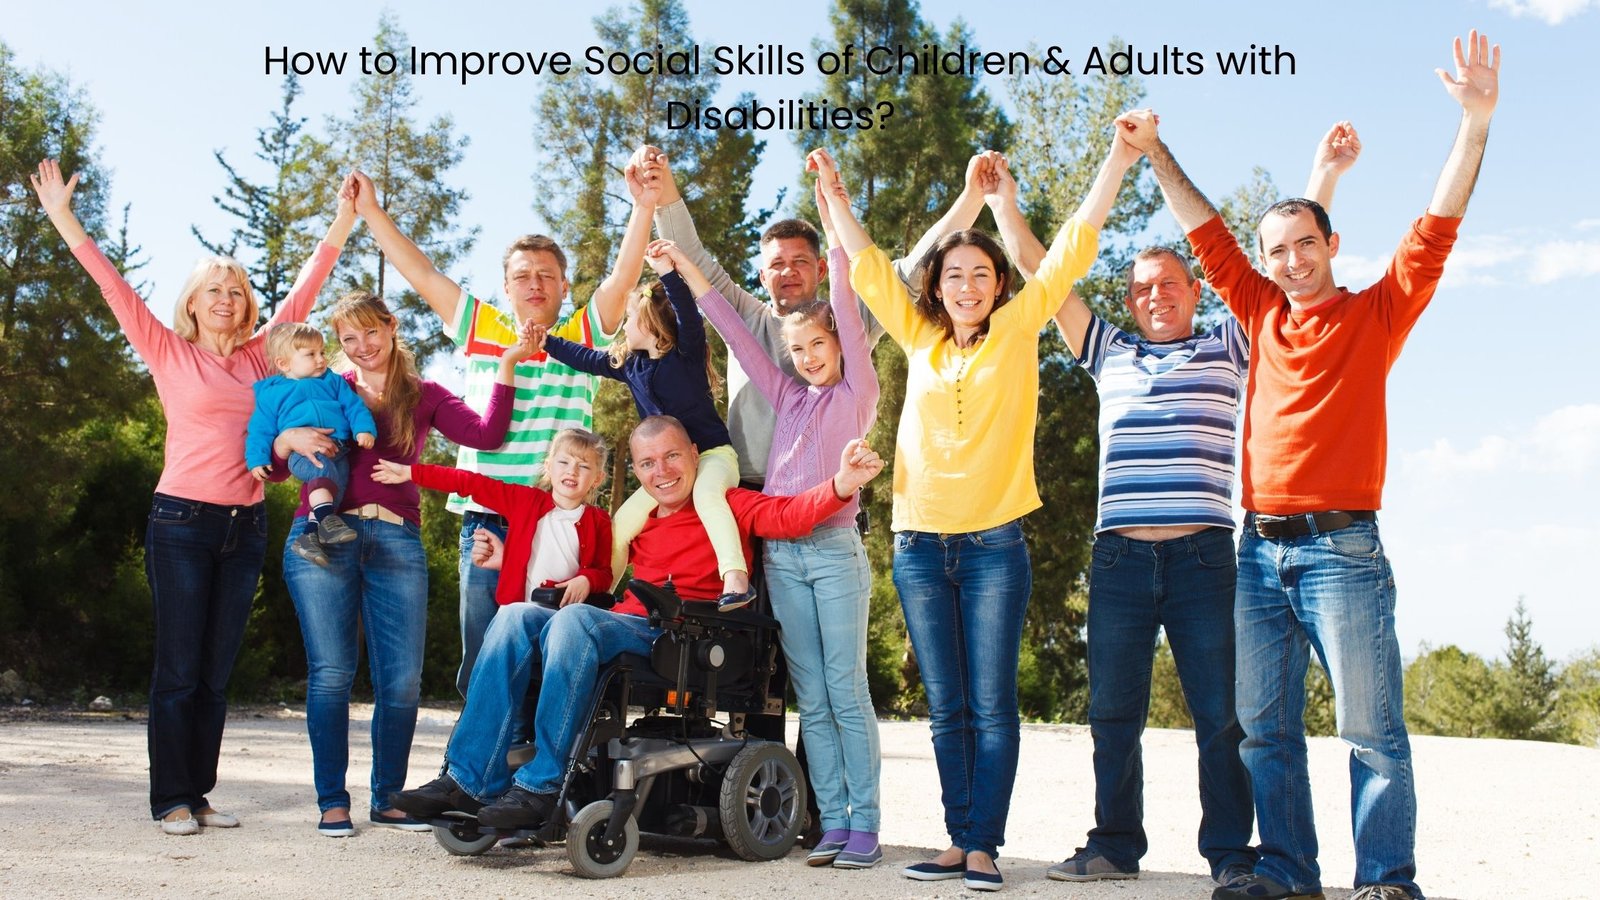 How To Improve Social Skills of Children & Adults With Disabilities